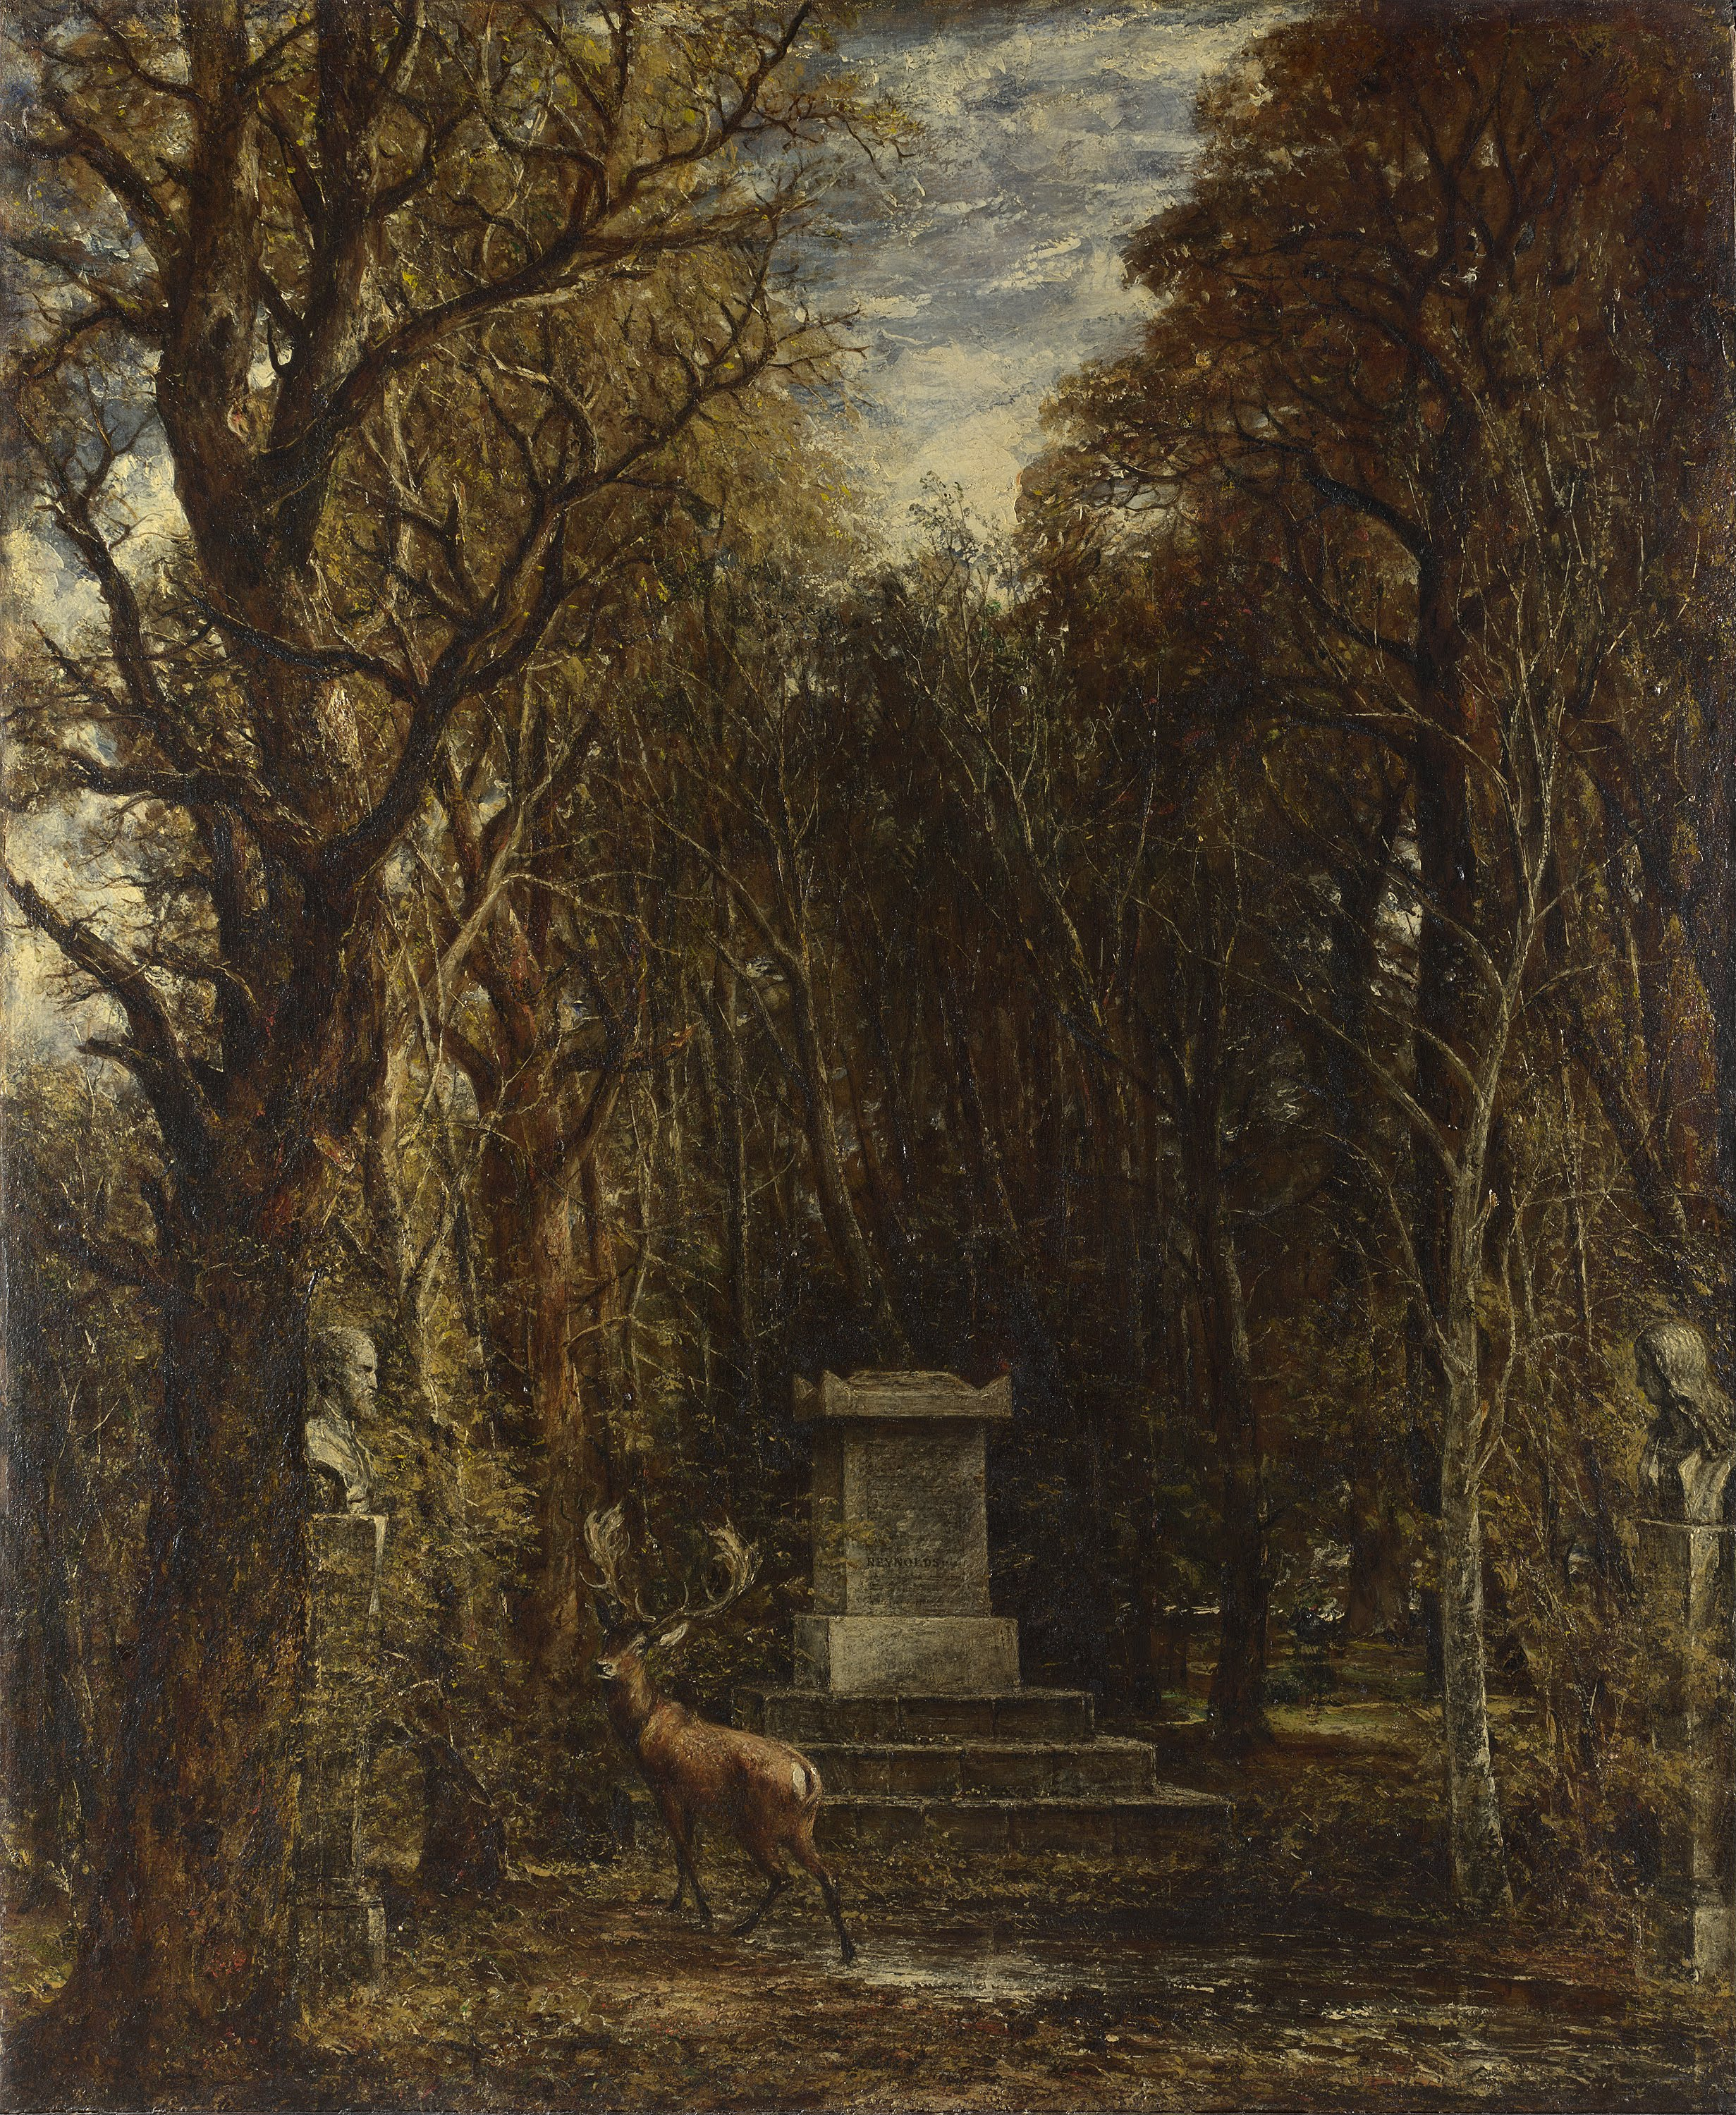 John Constable - Cenotaph to the Memory of Sir Joshua Reynolds - Google Art Project